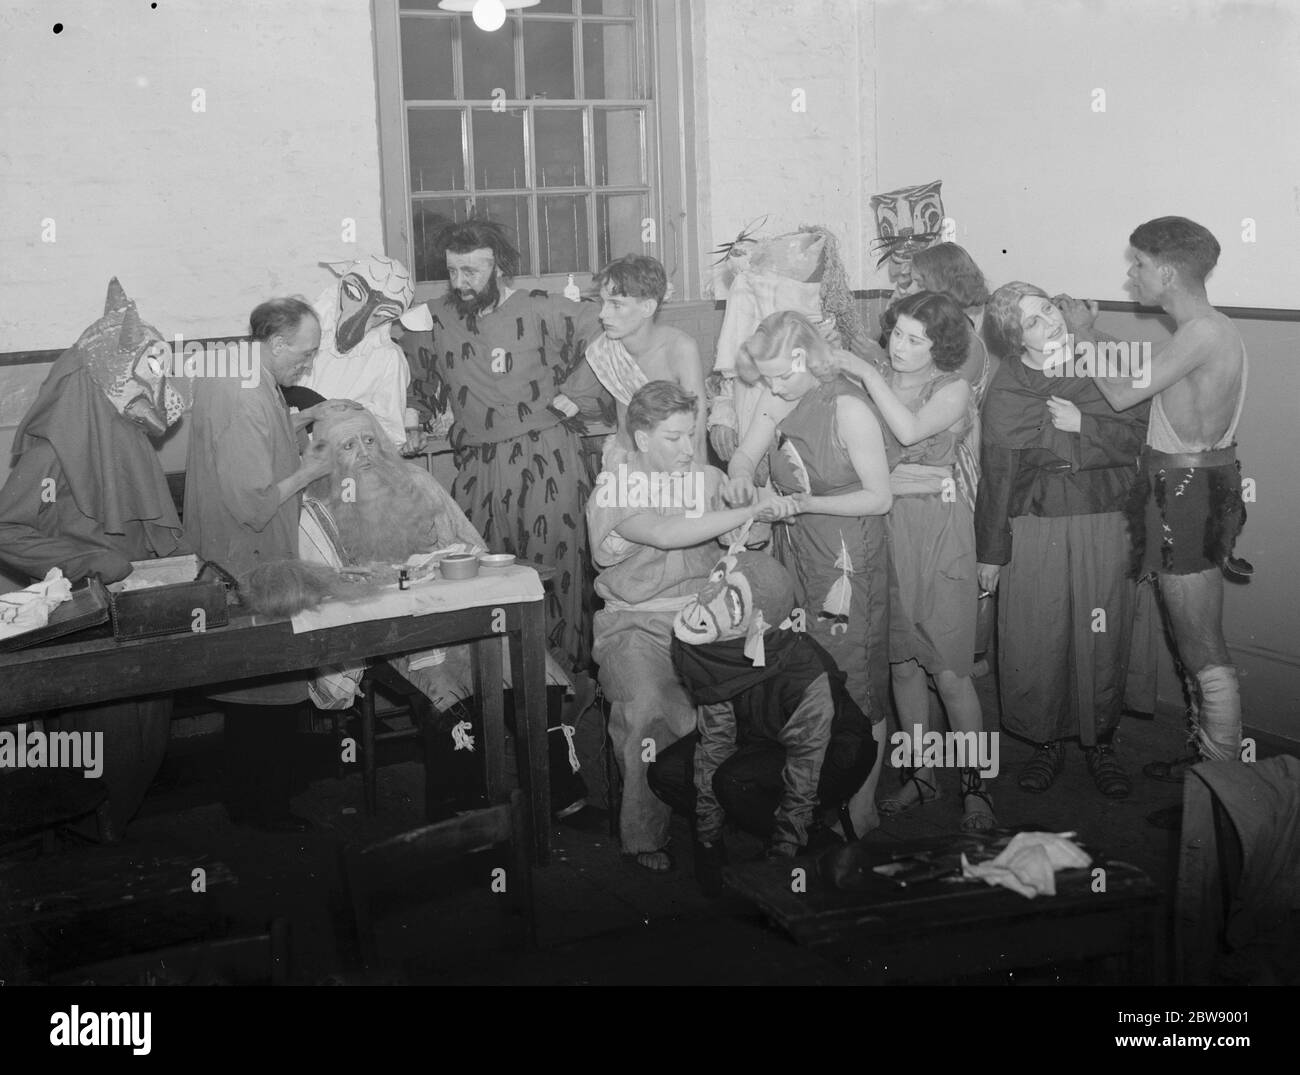 D P R Hunt at Goldsmiths College in Newcross , London , preparing for one of their shows . The performers are in the hair and makeup room . 1939 Stock Photo